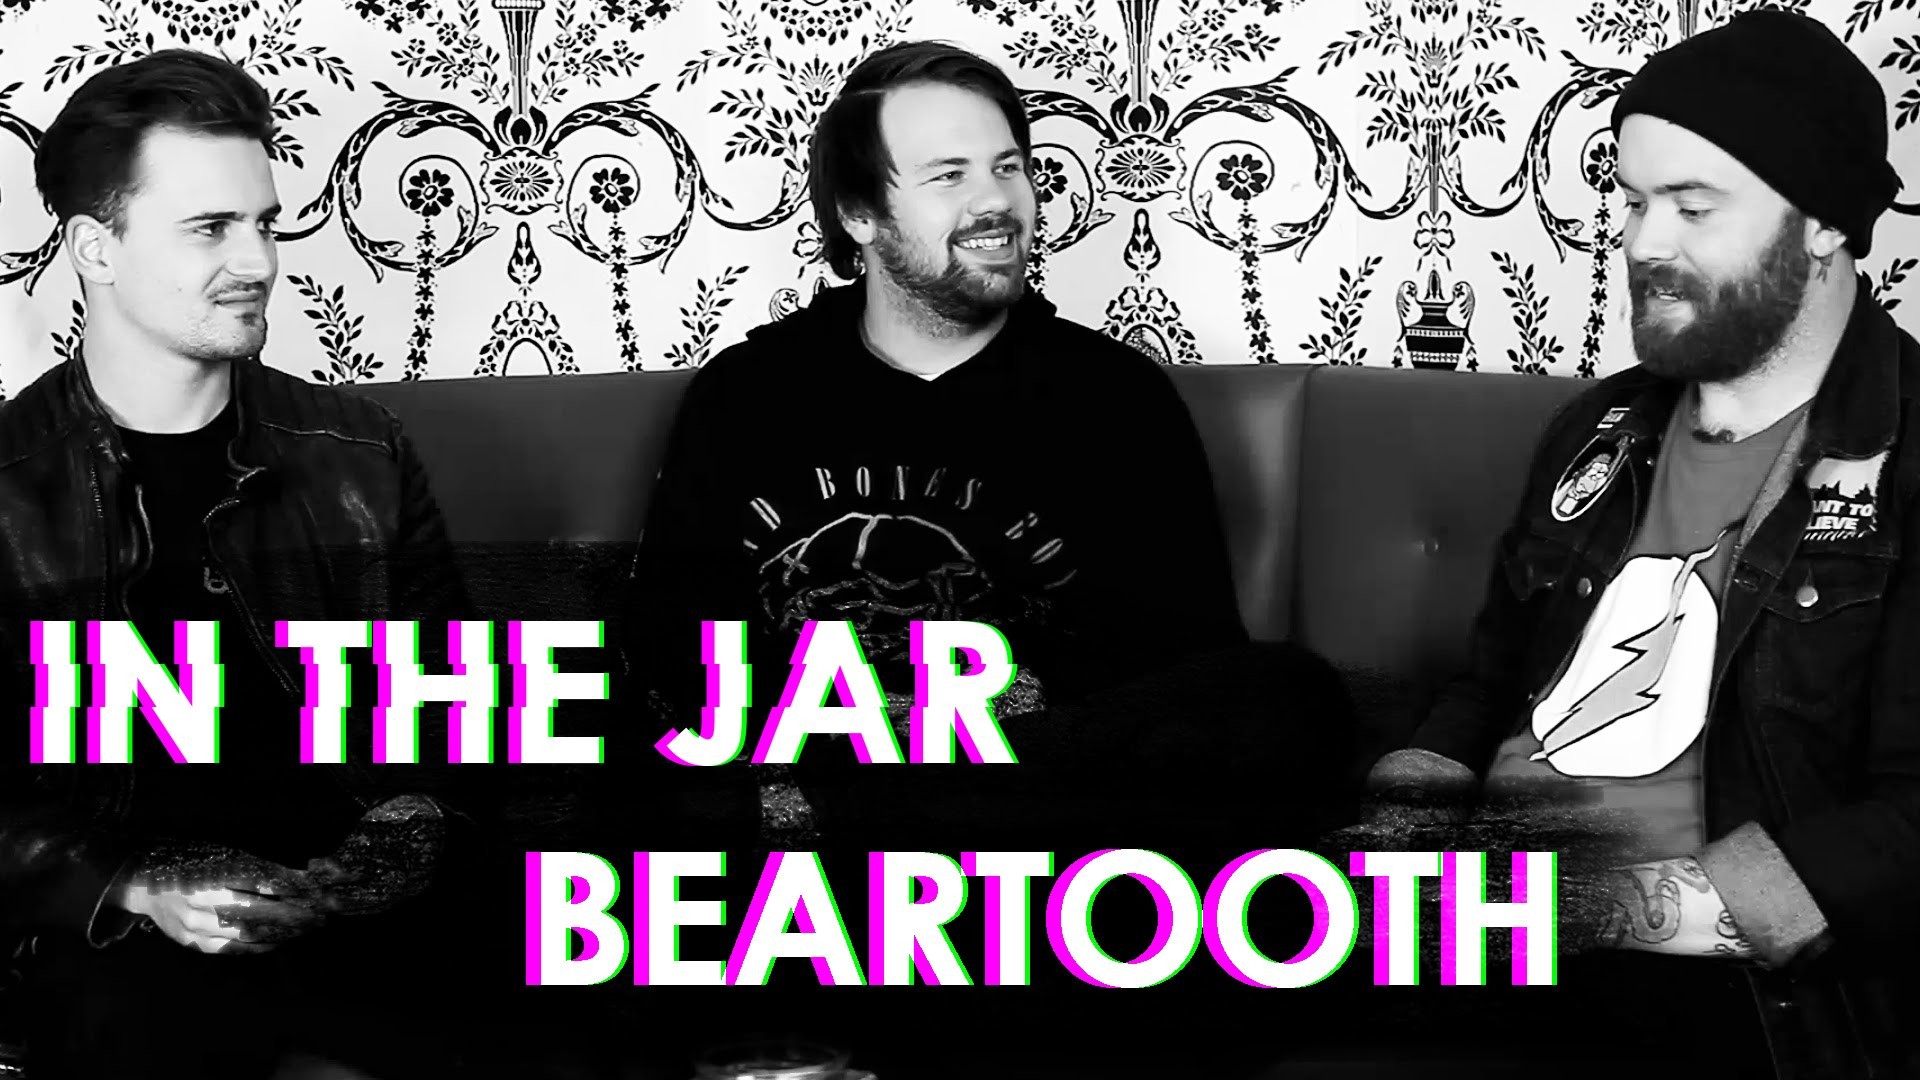 1920x1080 Exclusive Beartooth interview - IN THE JAR with Beartooth